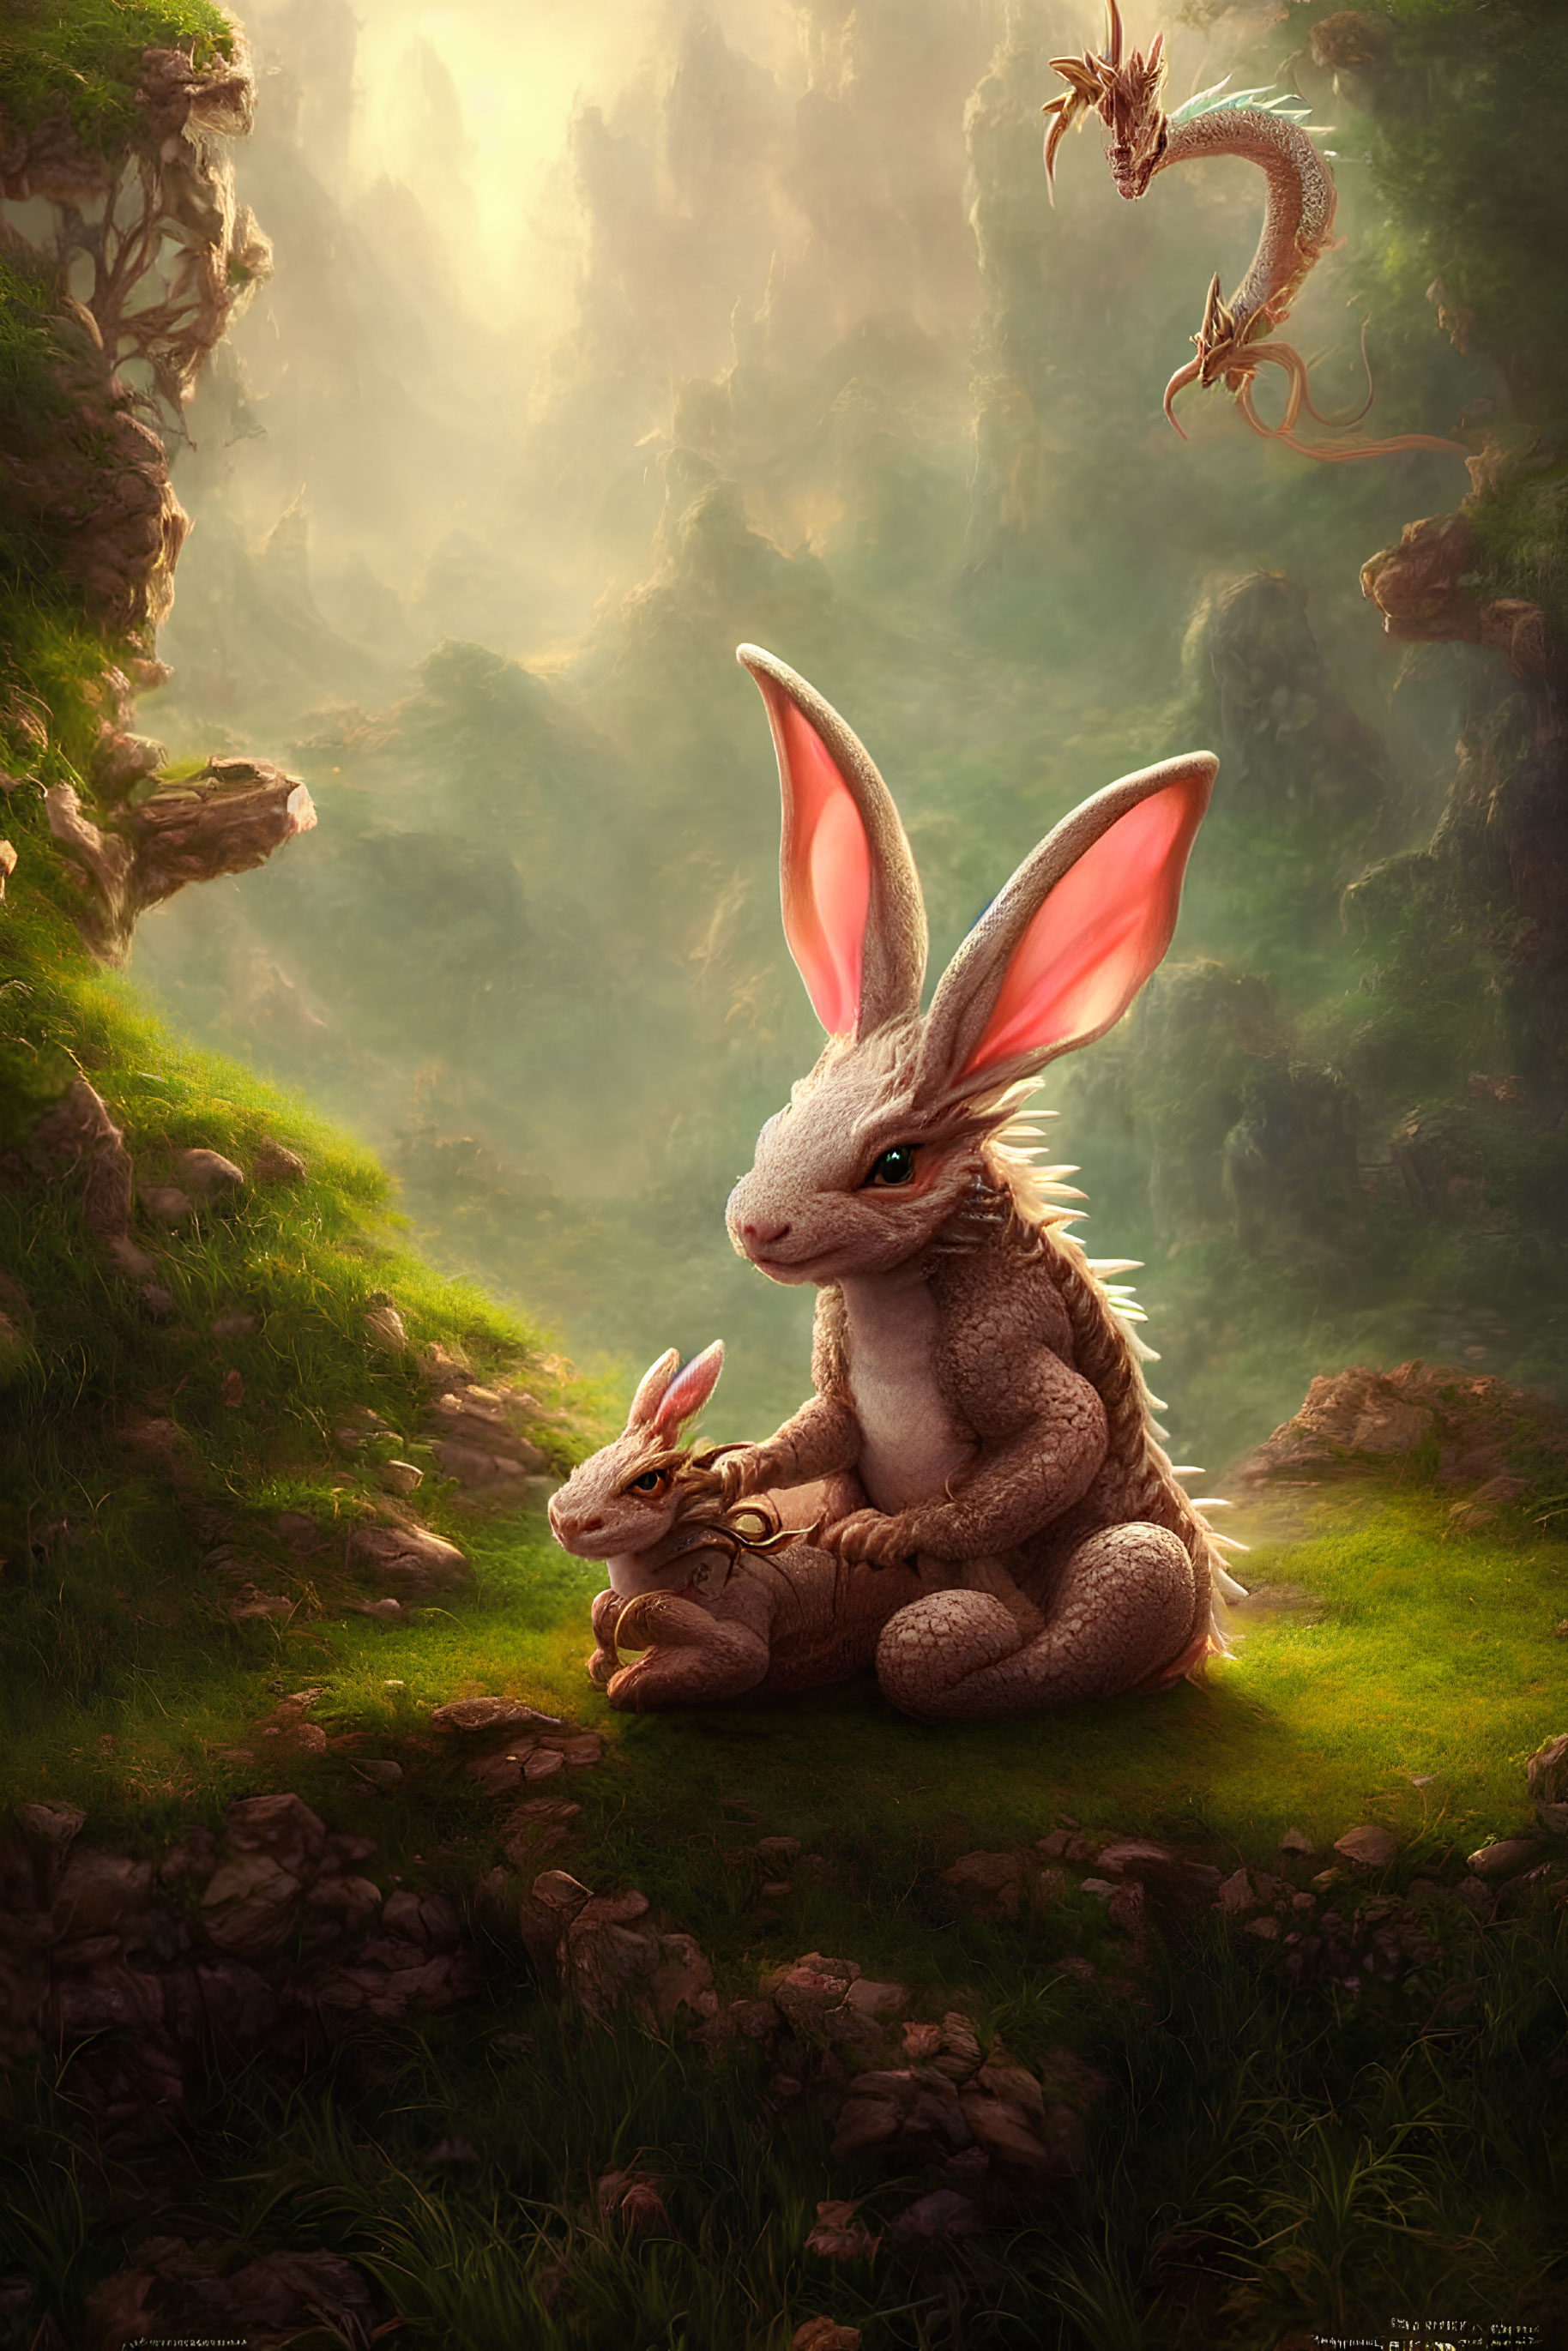 Fantasy image of rabbit-like creatures and dragon in mystical forest